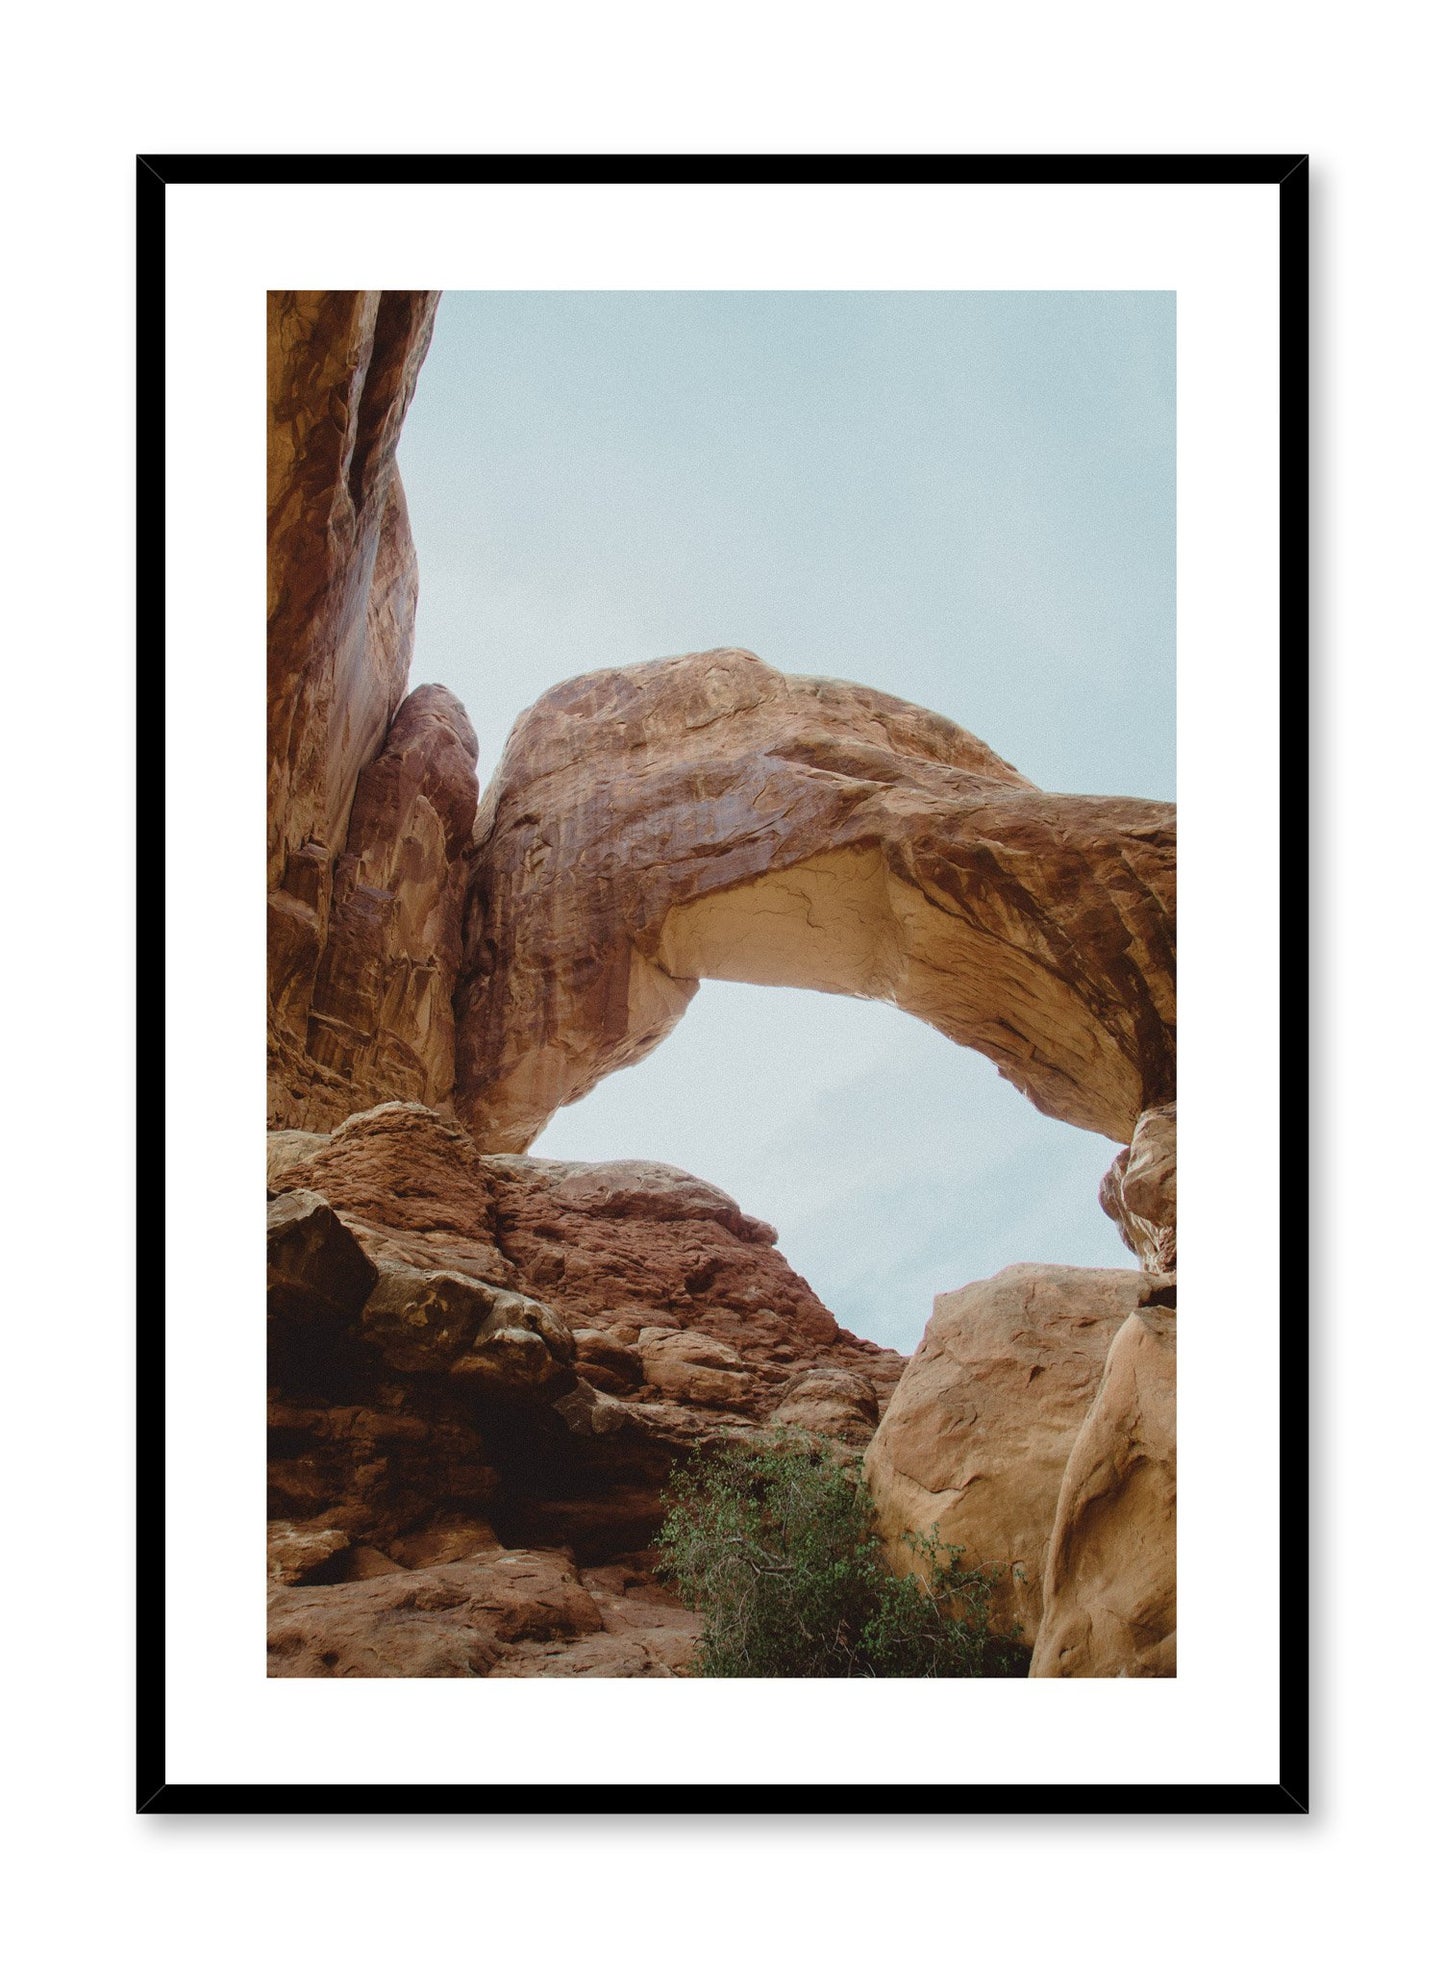 Modern minimalist photography poster by Opposite Wall with arched rock formation